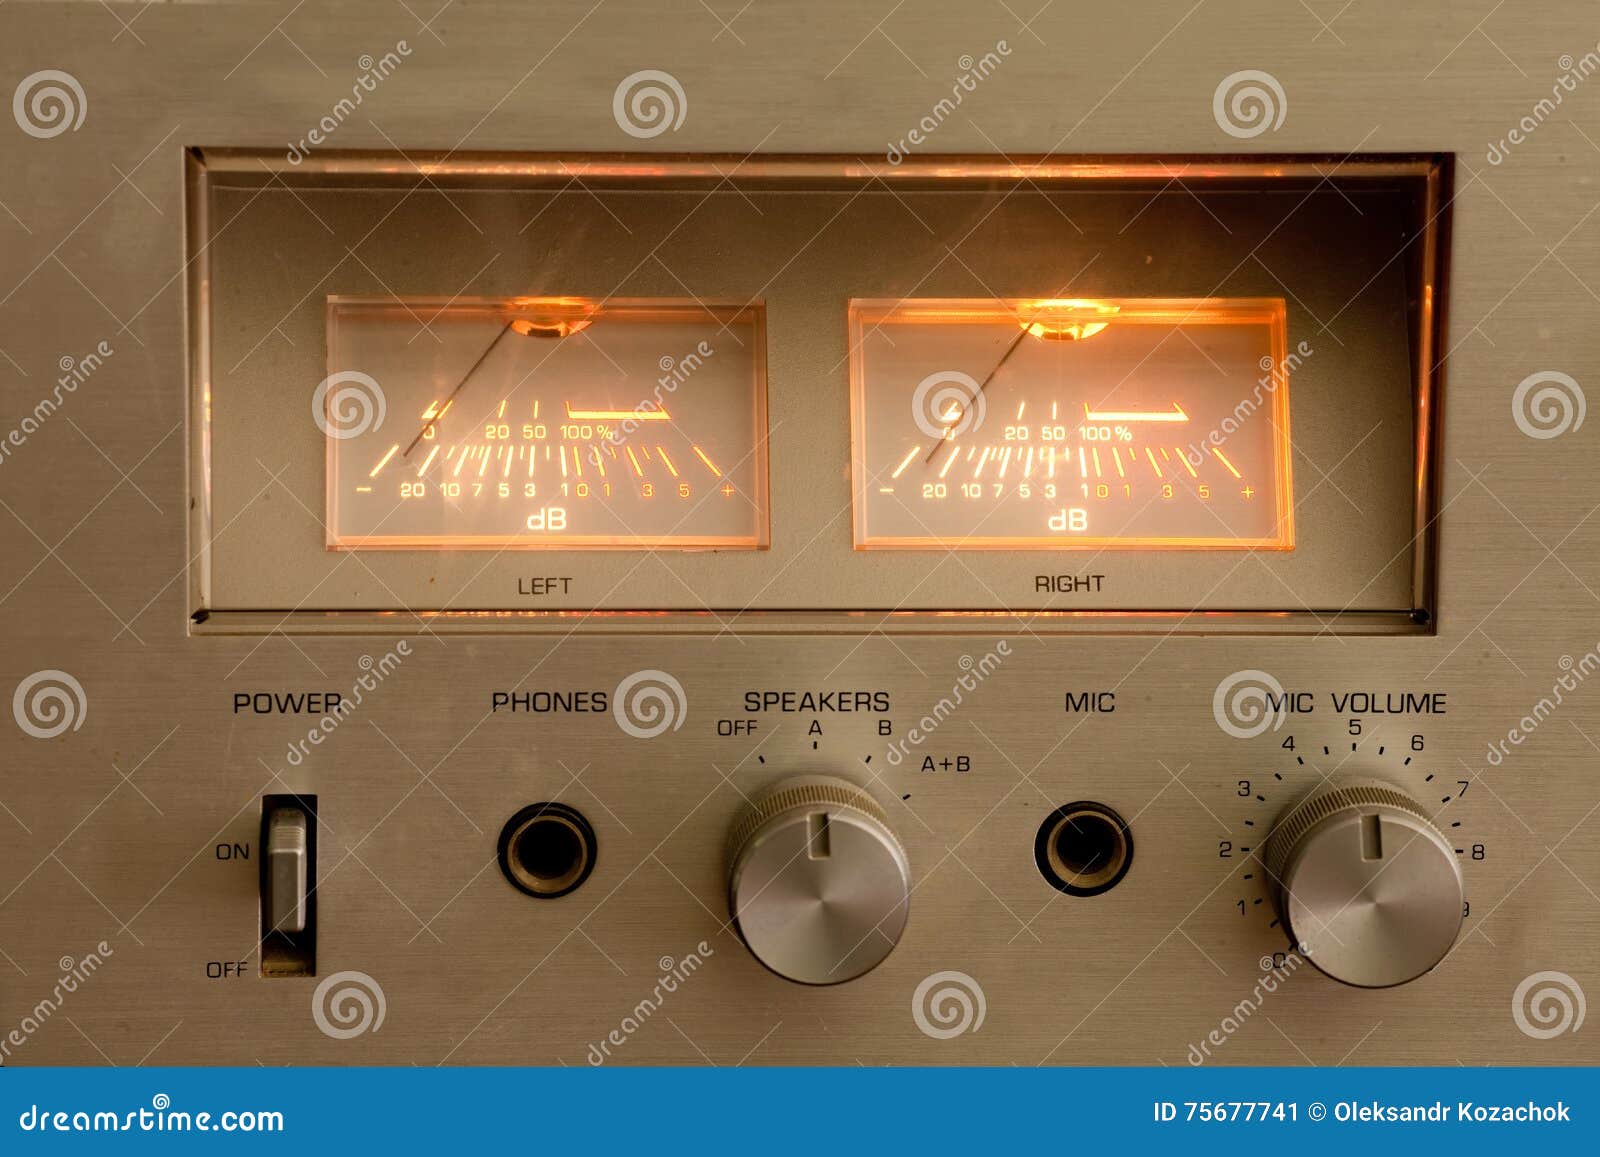 Top Of Vintage Hi Fi Stereo Amplifier Wooden Cabinet Stock Image